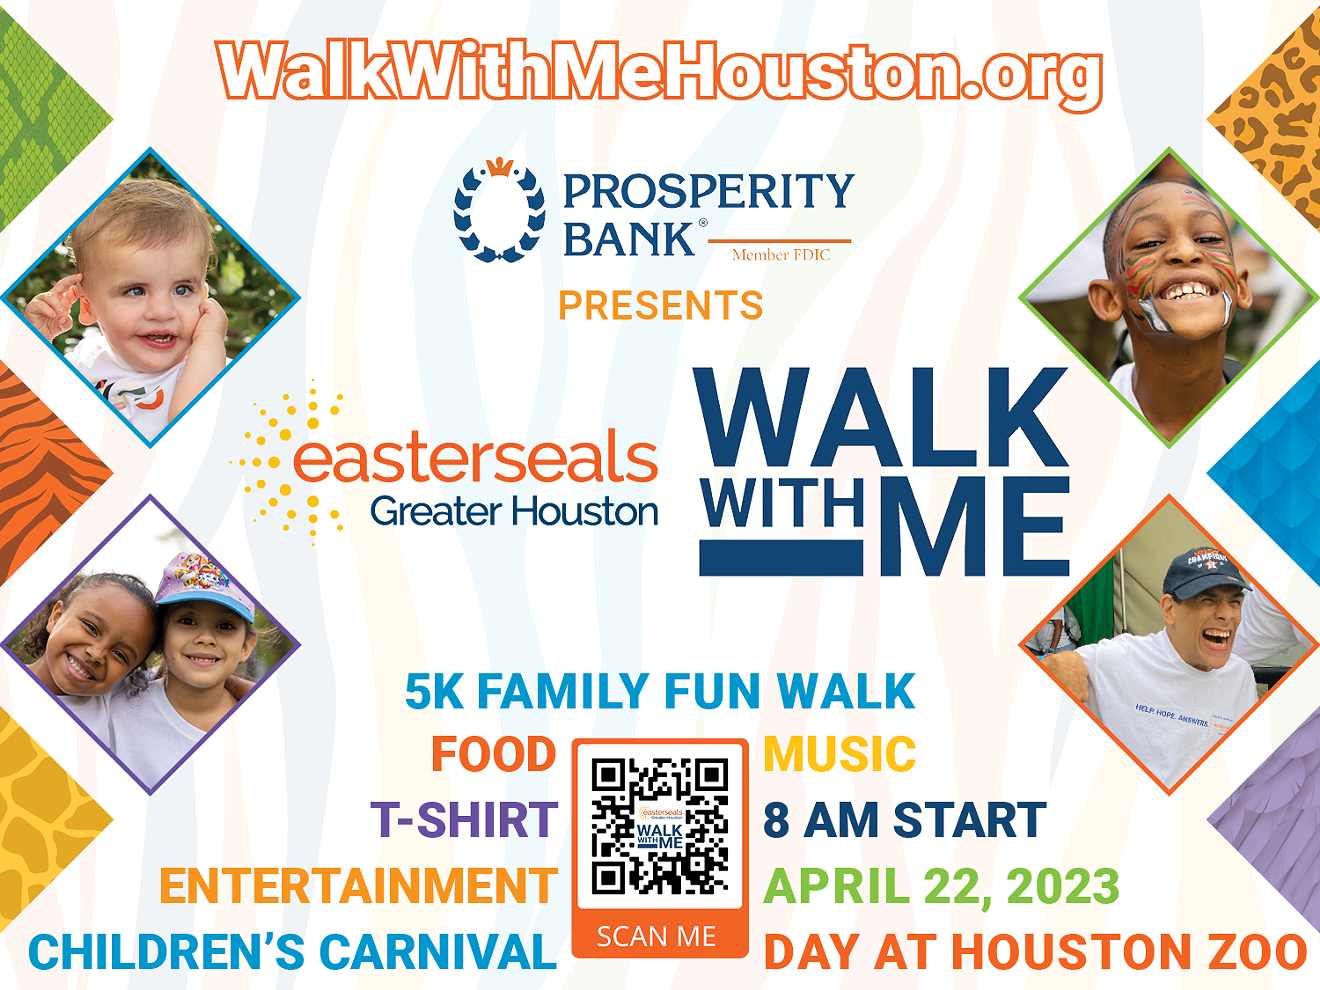 Go to WalkWithMeHouston.org to register or donate today!